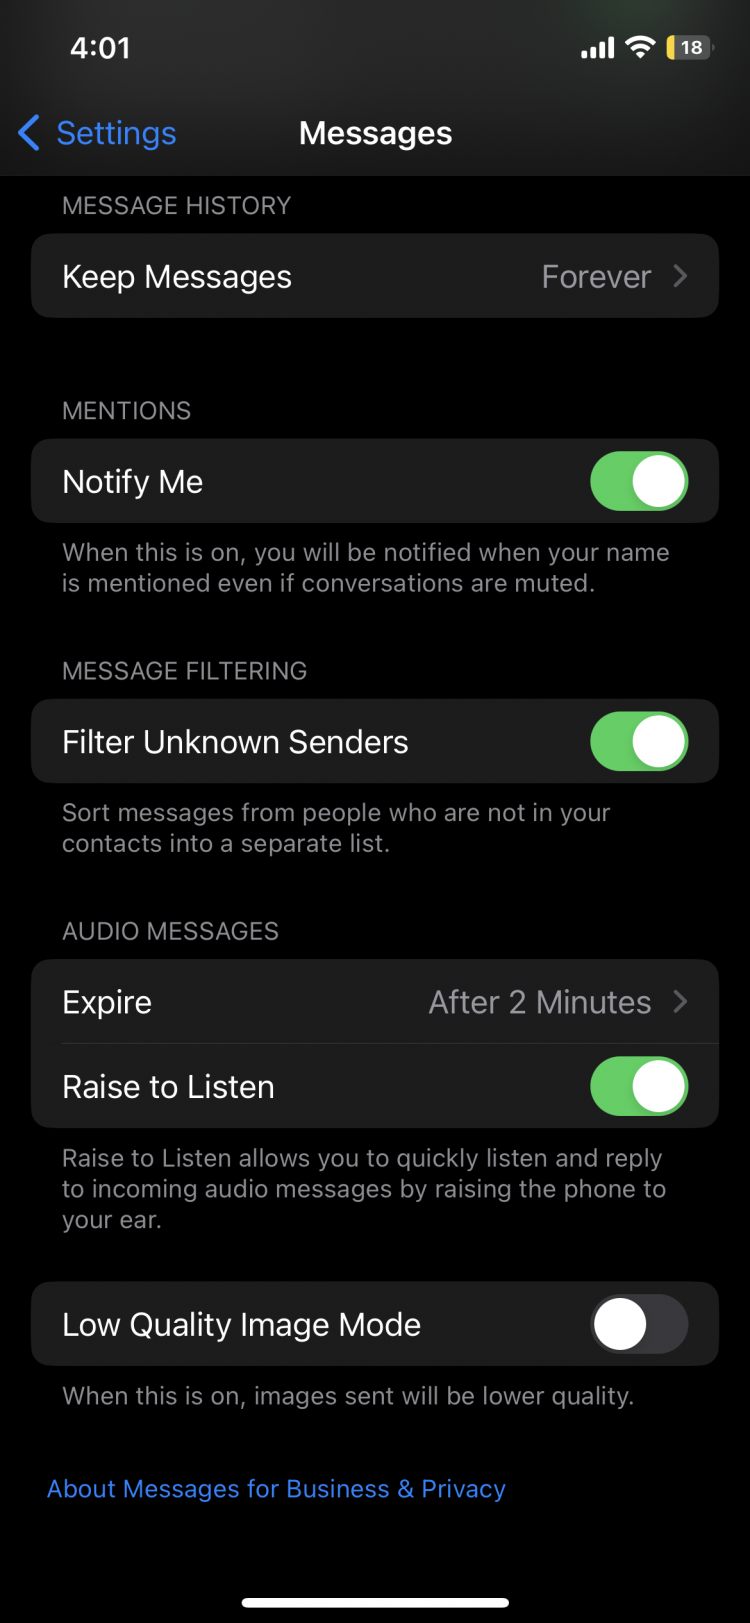 iOS 16 now sort messages between known and unknown senders